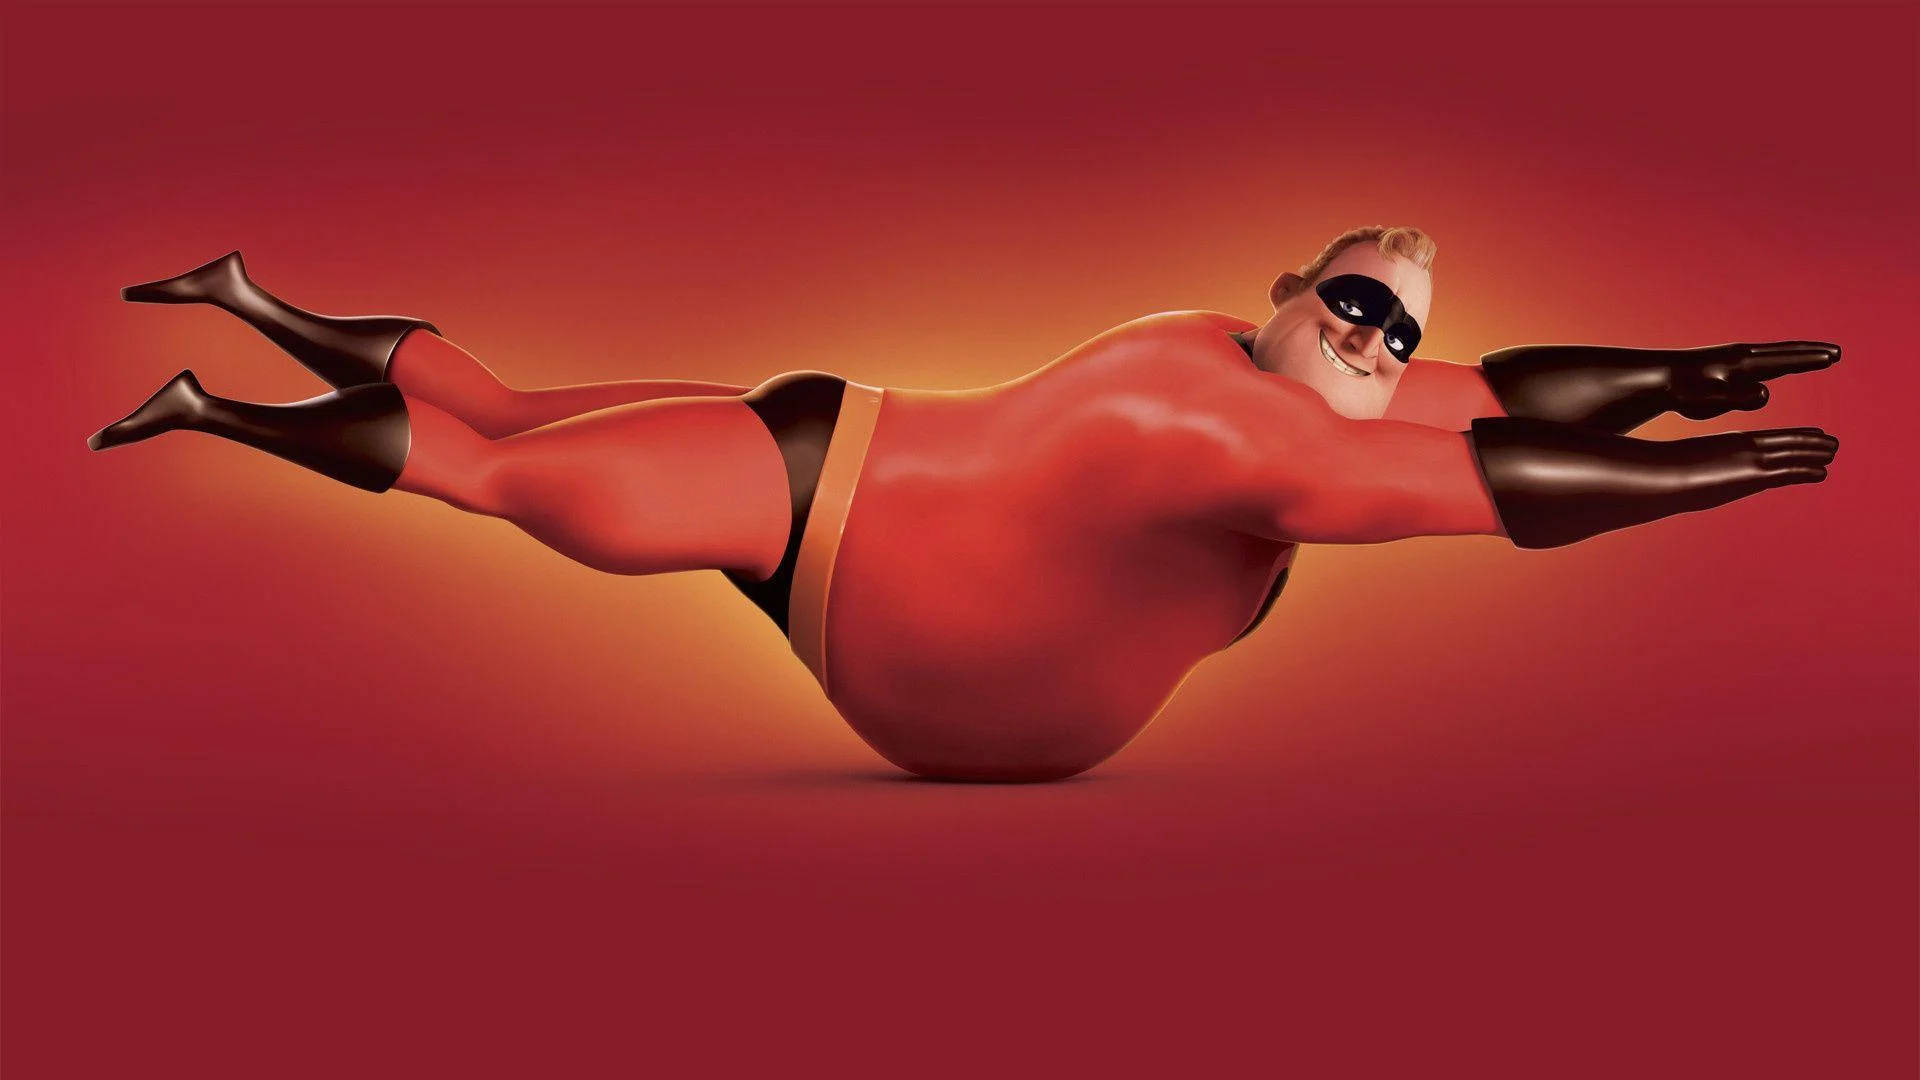 Action-packed Moment with Bob Parr from Incredibles 2 Wallpaper